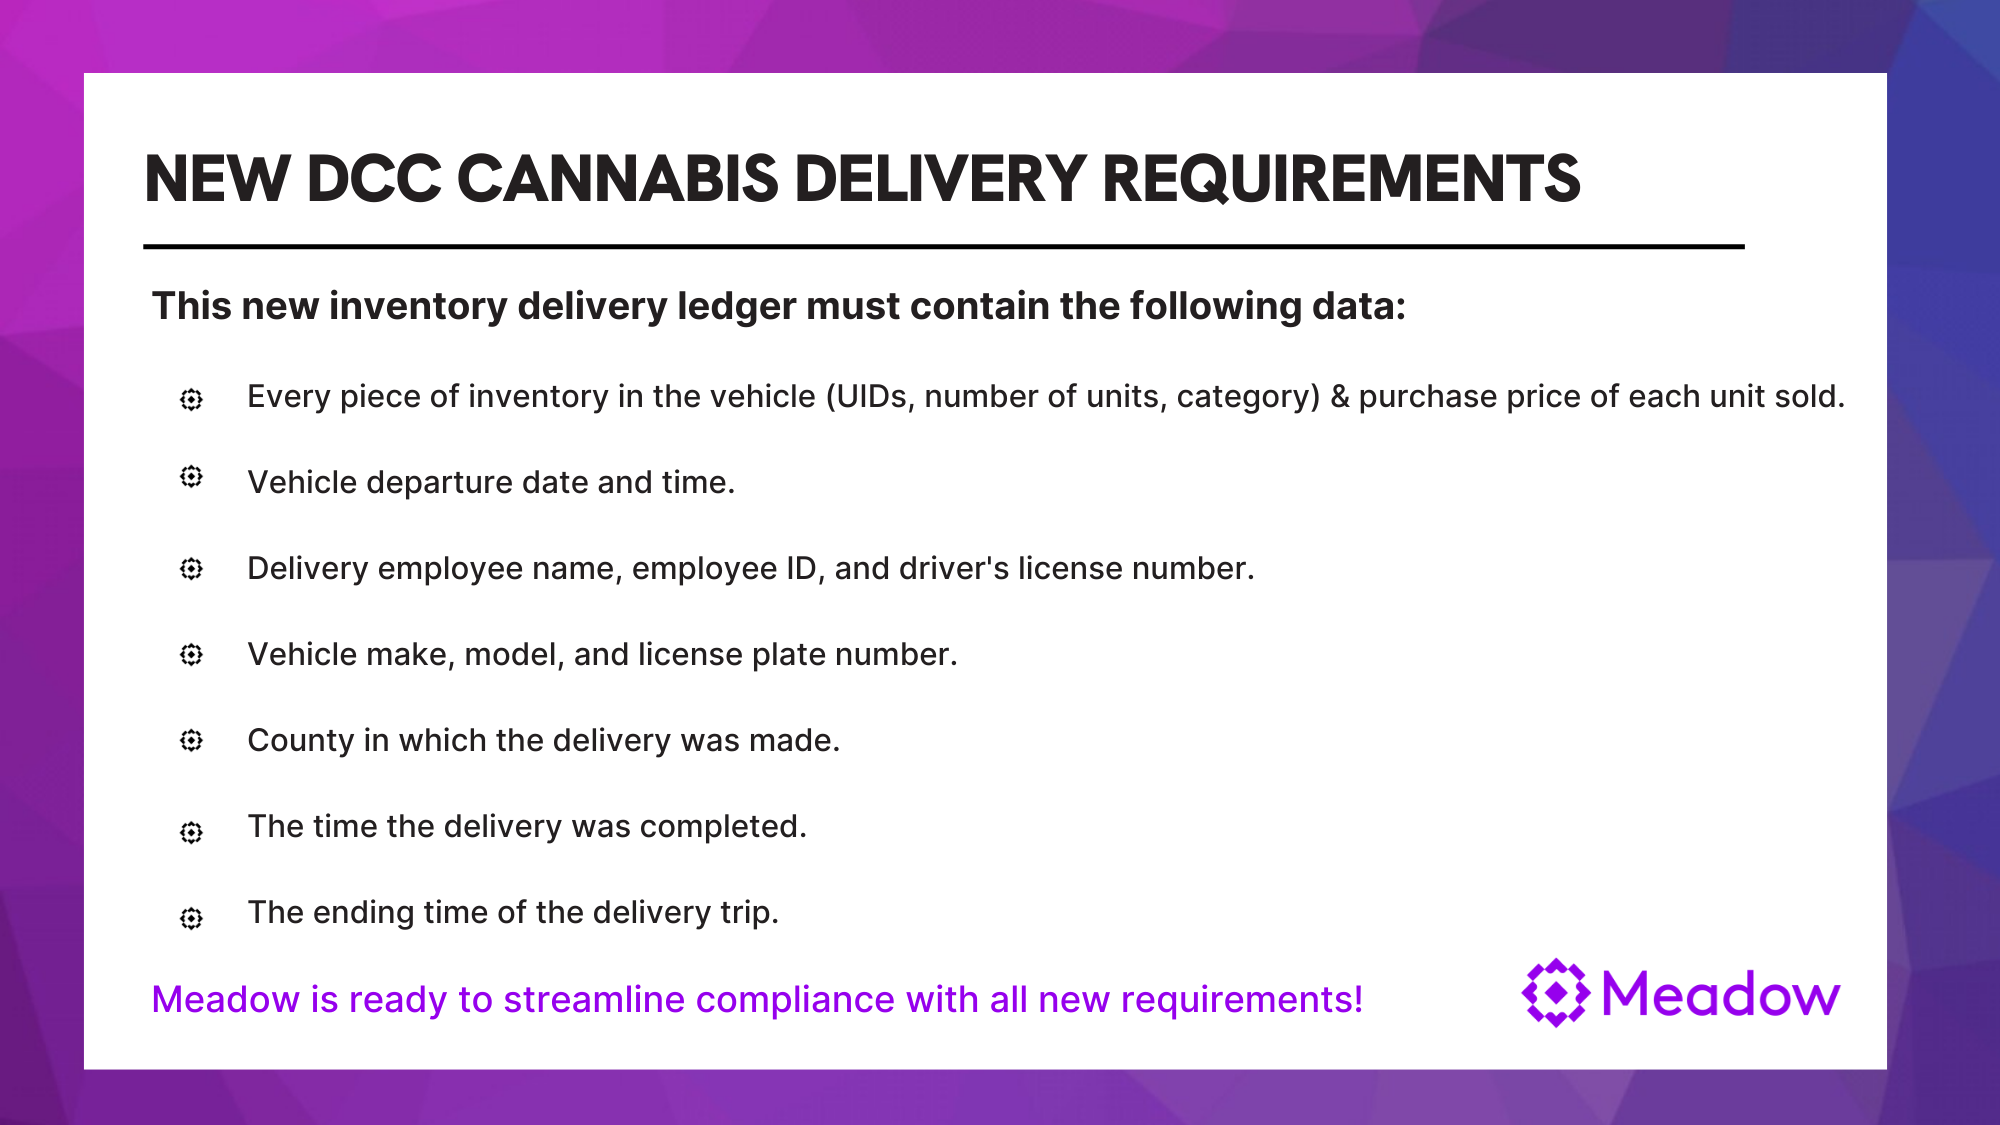 CA Cannabis delivery inventory ledger